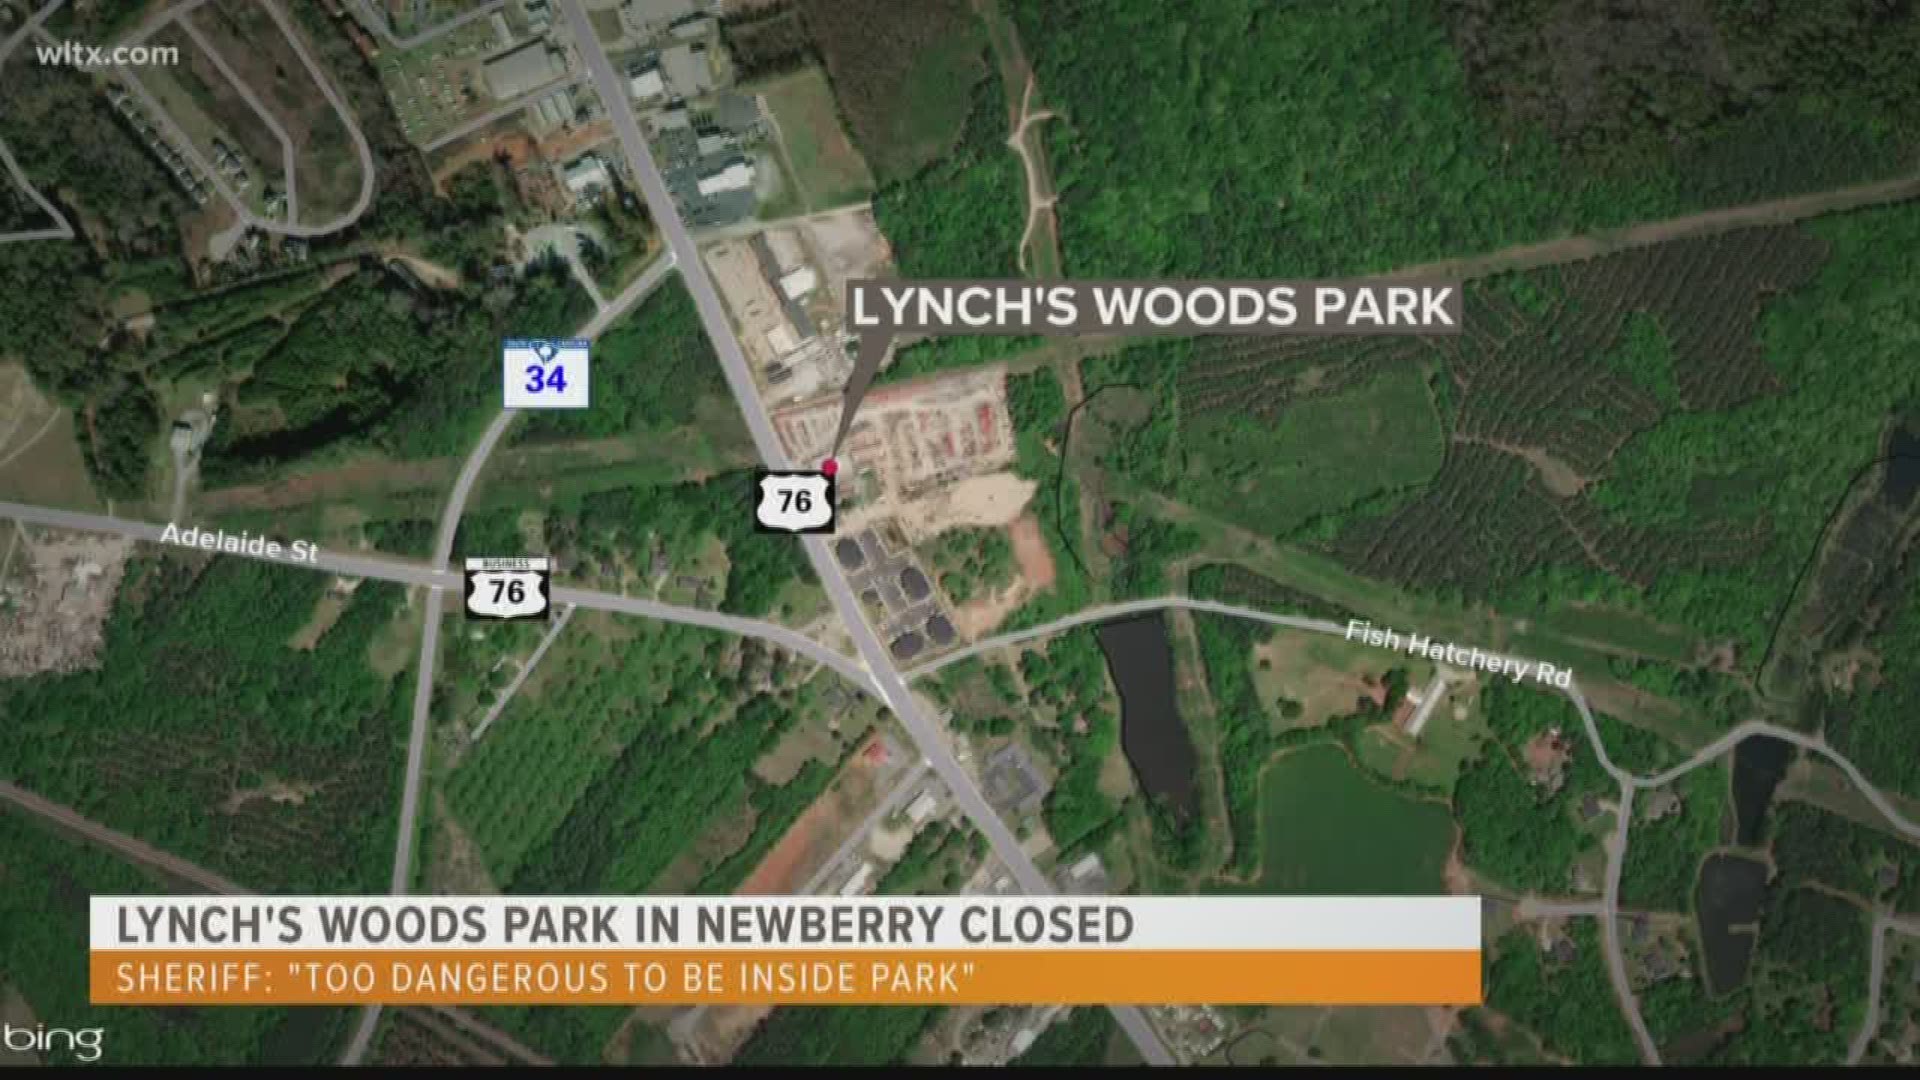 Newberry County Sheriff Lee Foster said the Lynch's Woods Park is closed because the recent severe weather has caused damage to bridges and downed trees in the area.